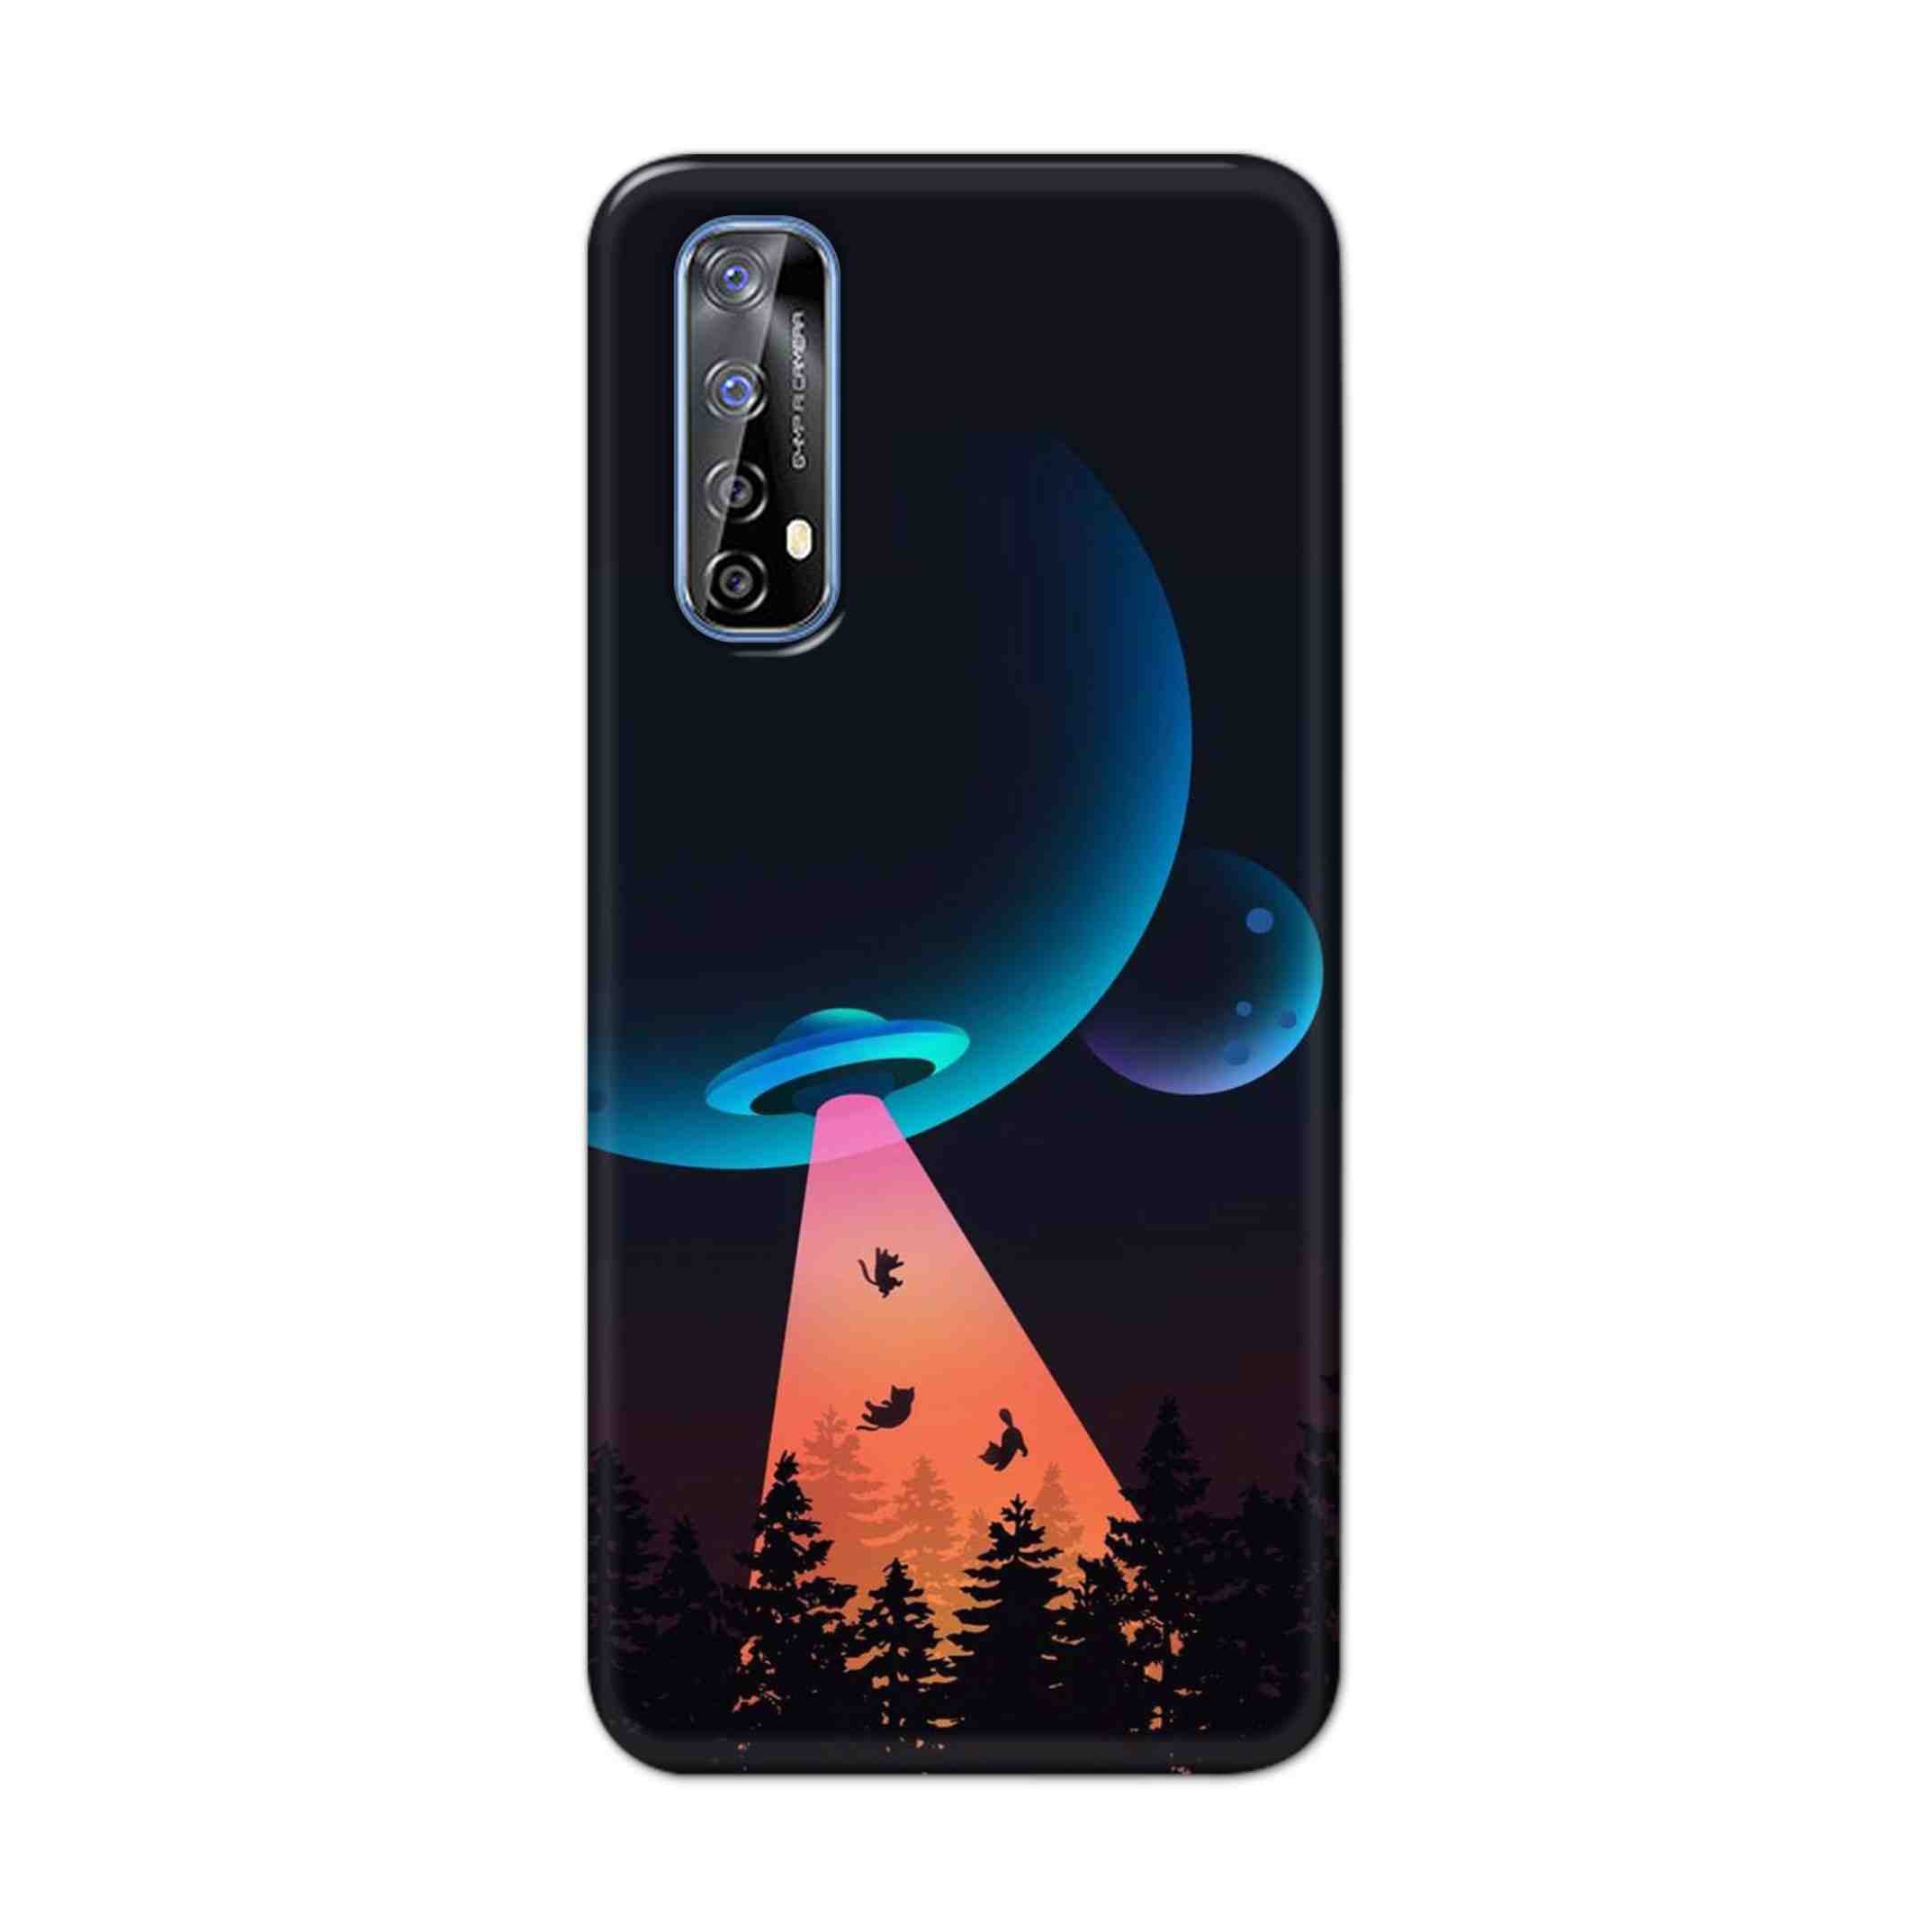 Buy Spaceship Hard Back Mobile Phone Case Cover For Realme 7 Online